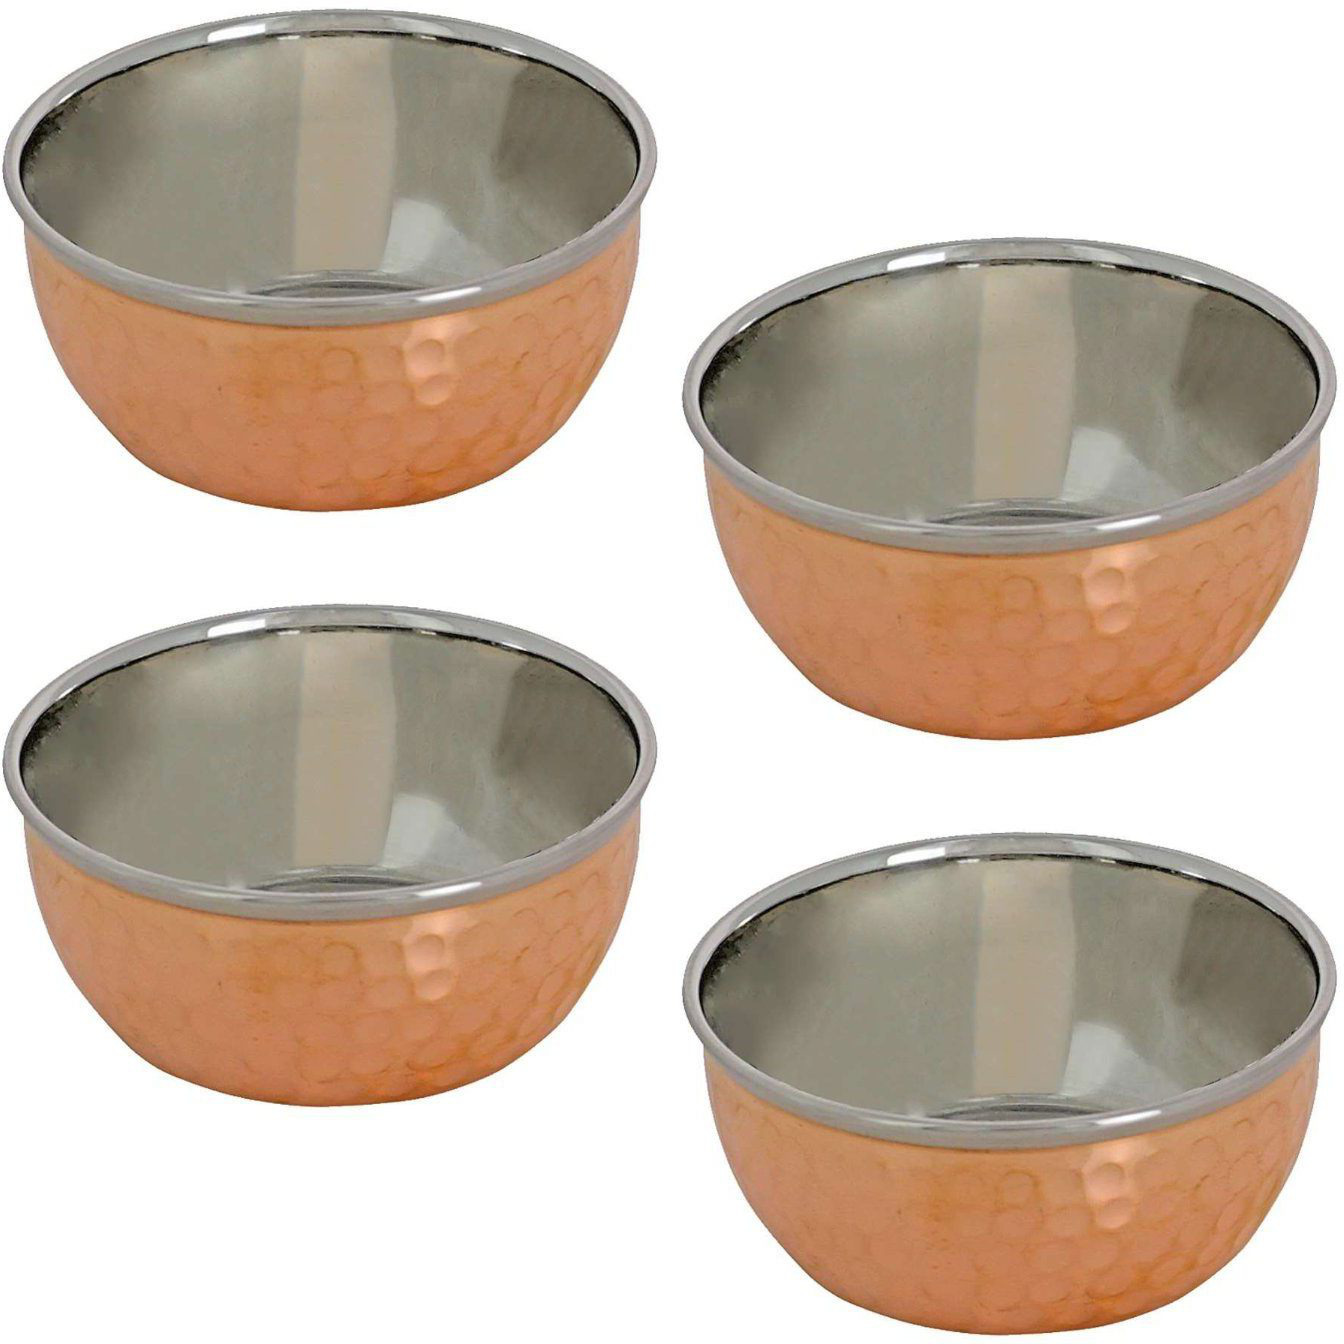 Prisha India Craft B. Set of 3 Dinnerware Traditional Stainless Steel Copper Dinner Set of Thali Plate, Bowls, Glass and Spoons, Dia 13  With 1 Stainless Steel Copper Hammered Pitcher Jug - Christmas Gift